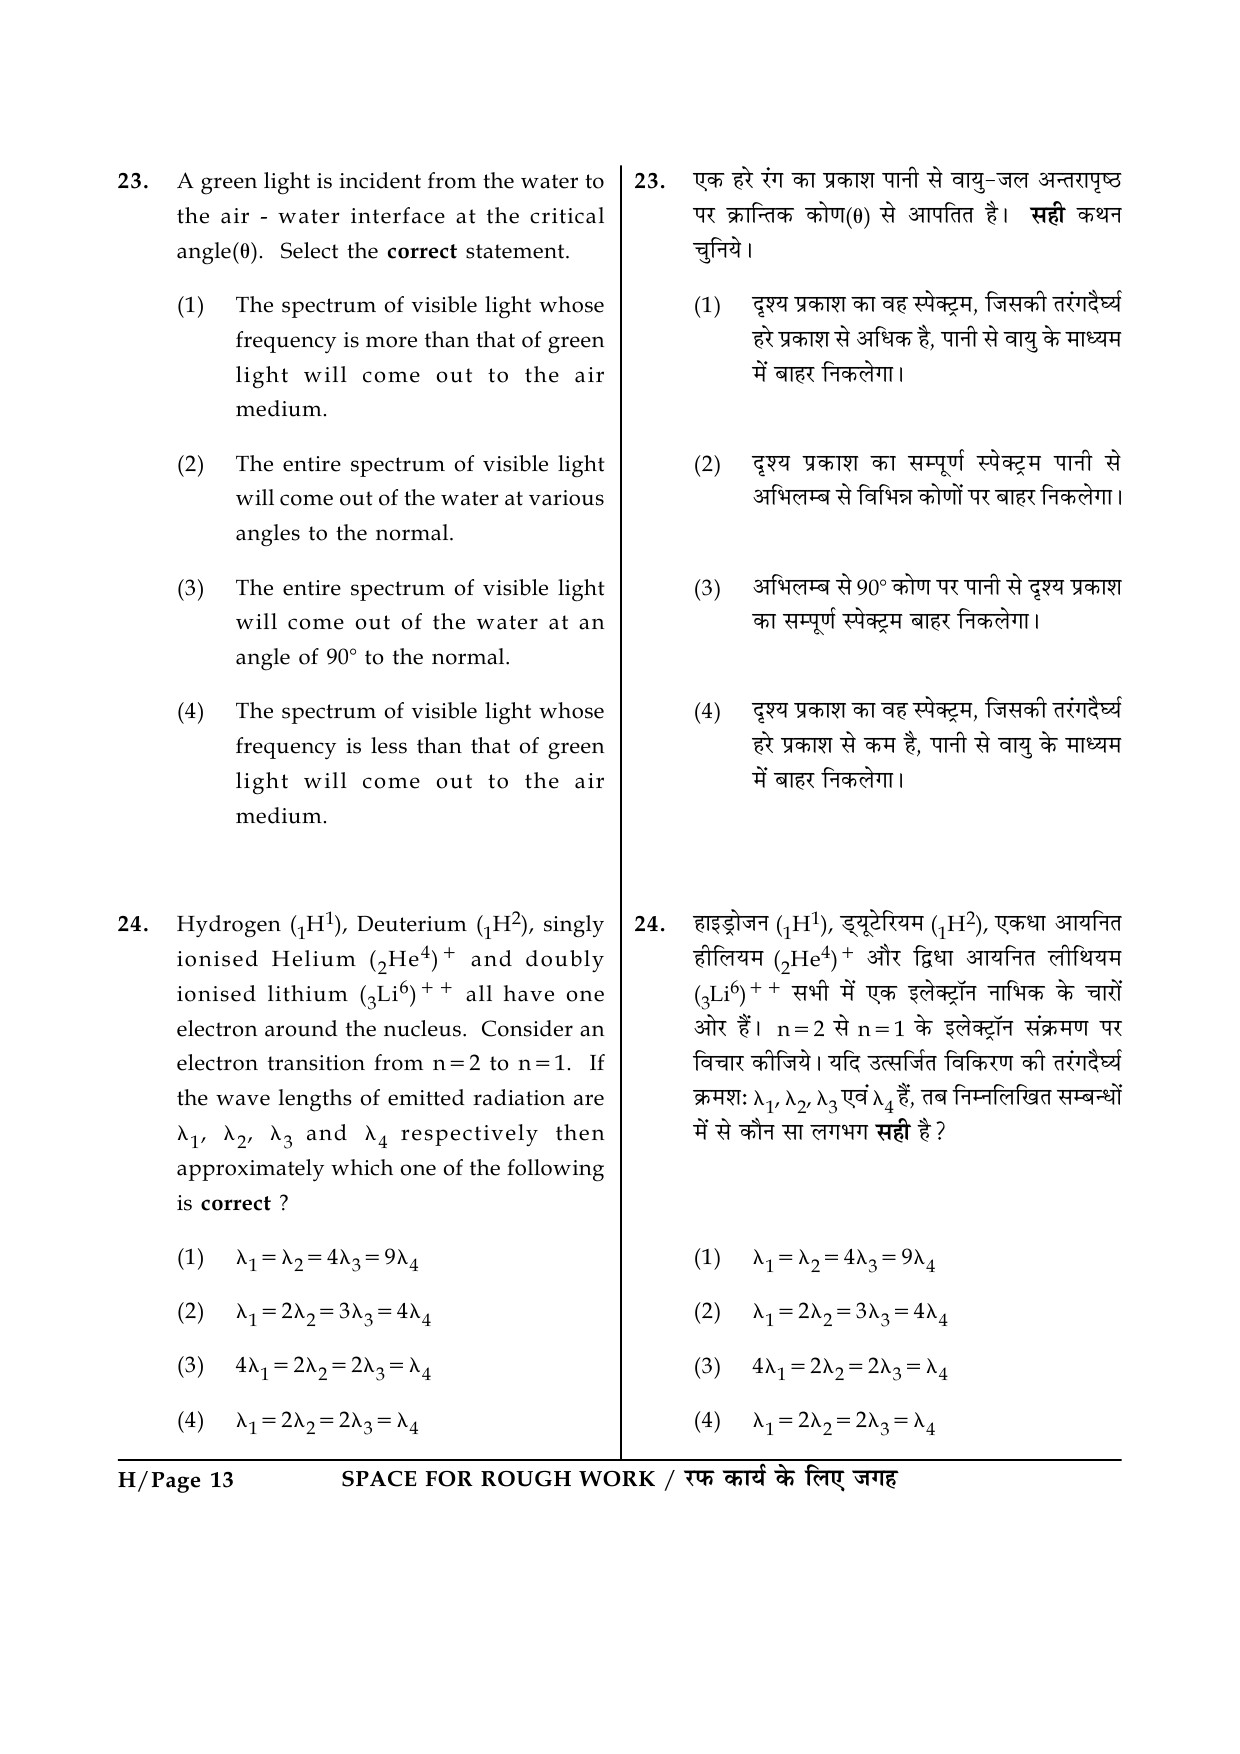 JEE Main Exam Question Paper 2014 Booklet H 13